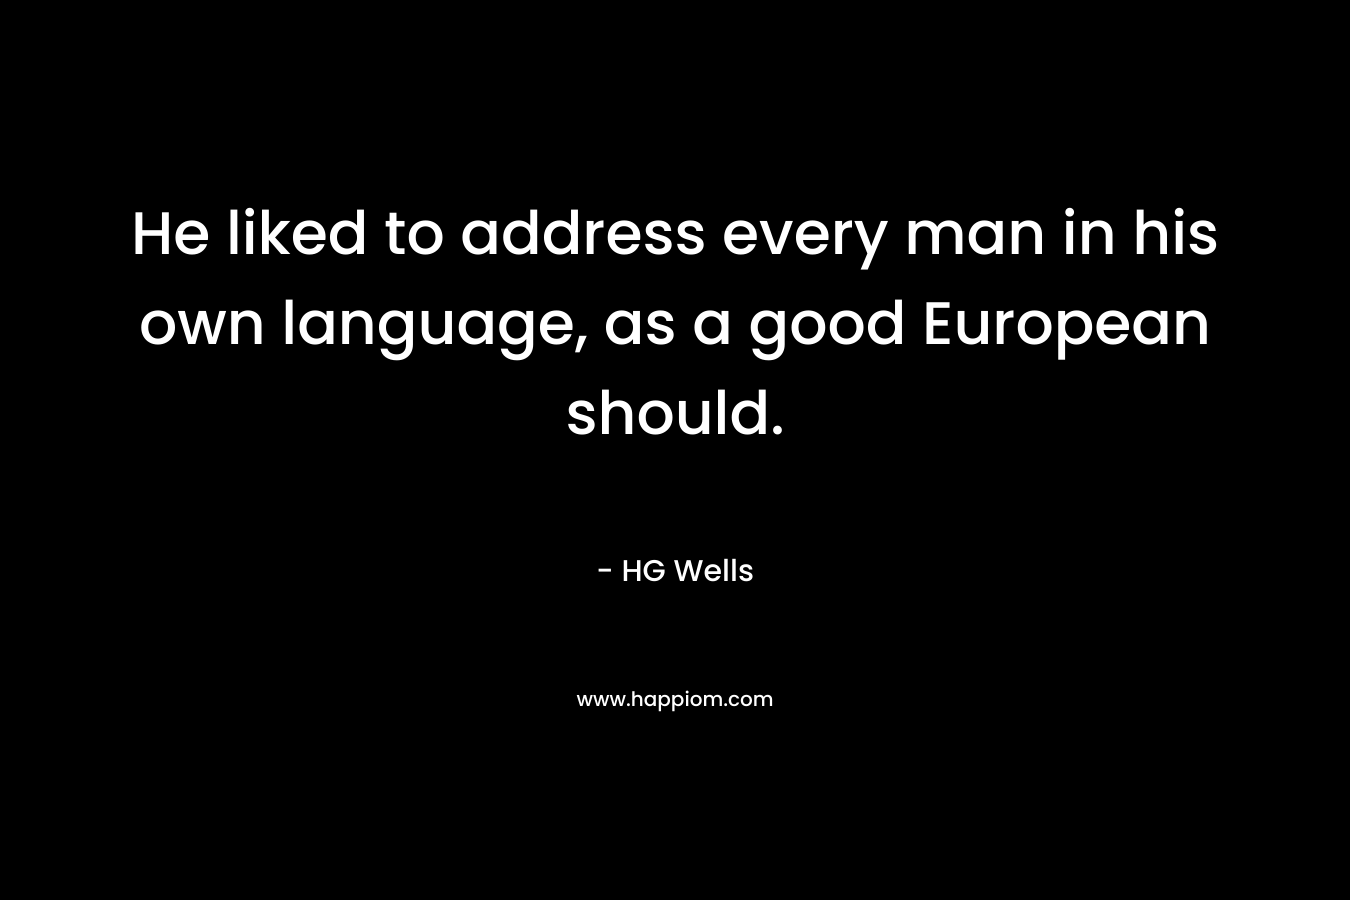 He liked to address every man in his own language, as a good European should. – HG Wells